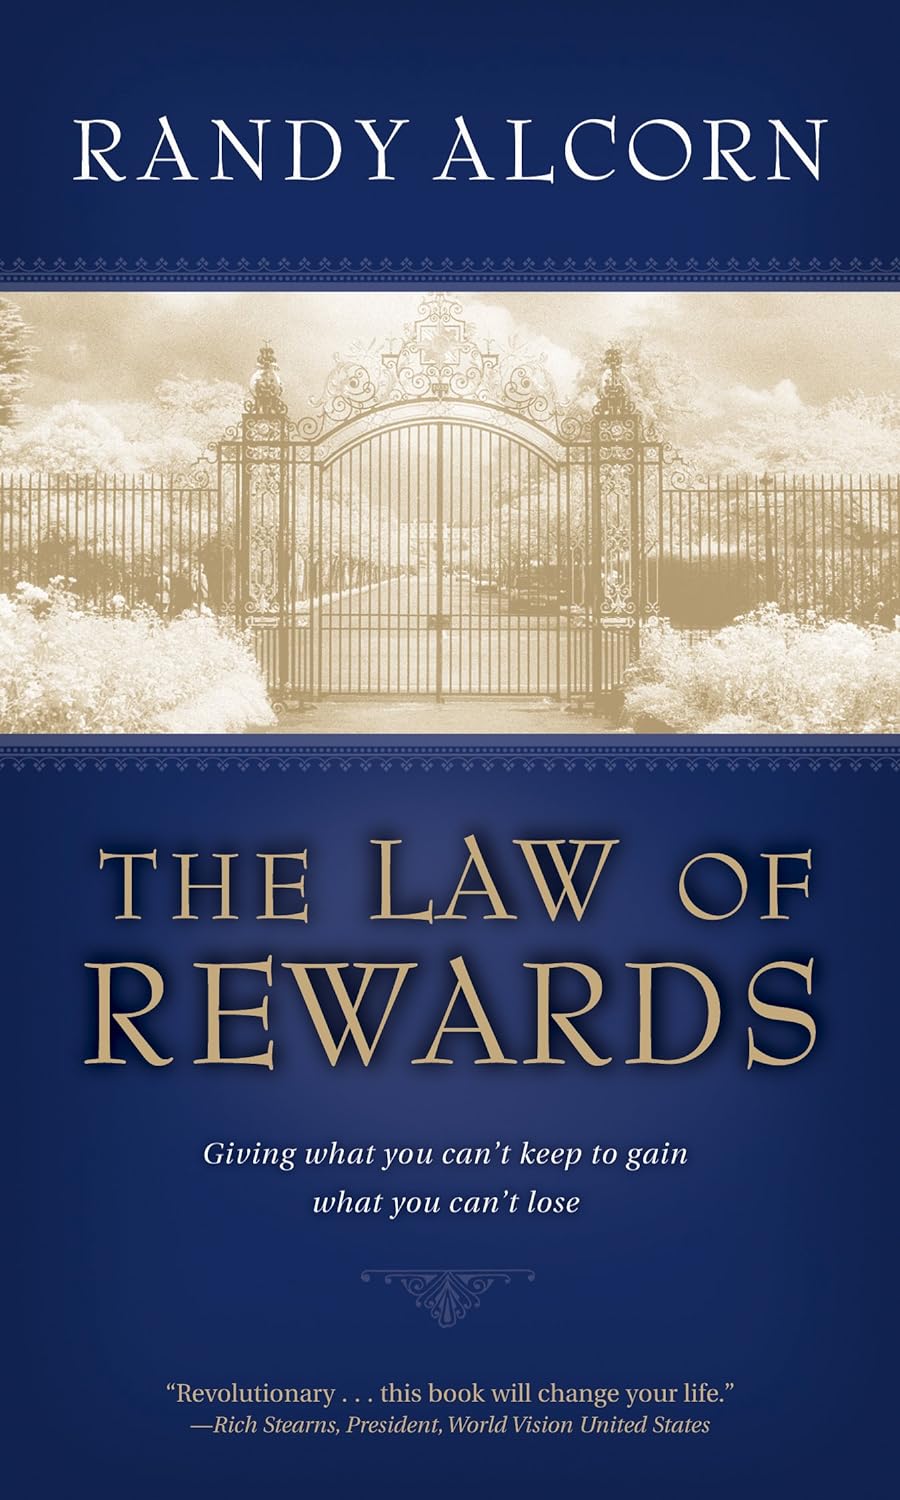 The Law of Rewards - Giving What You Can't Keep to Gain What You Can't Lose